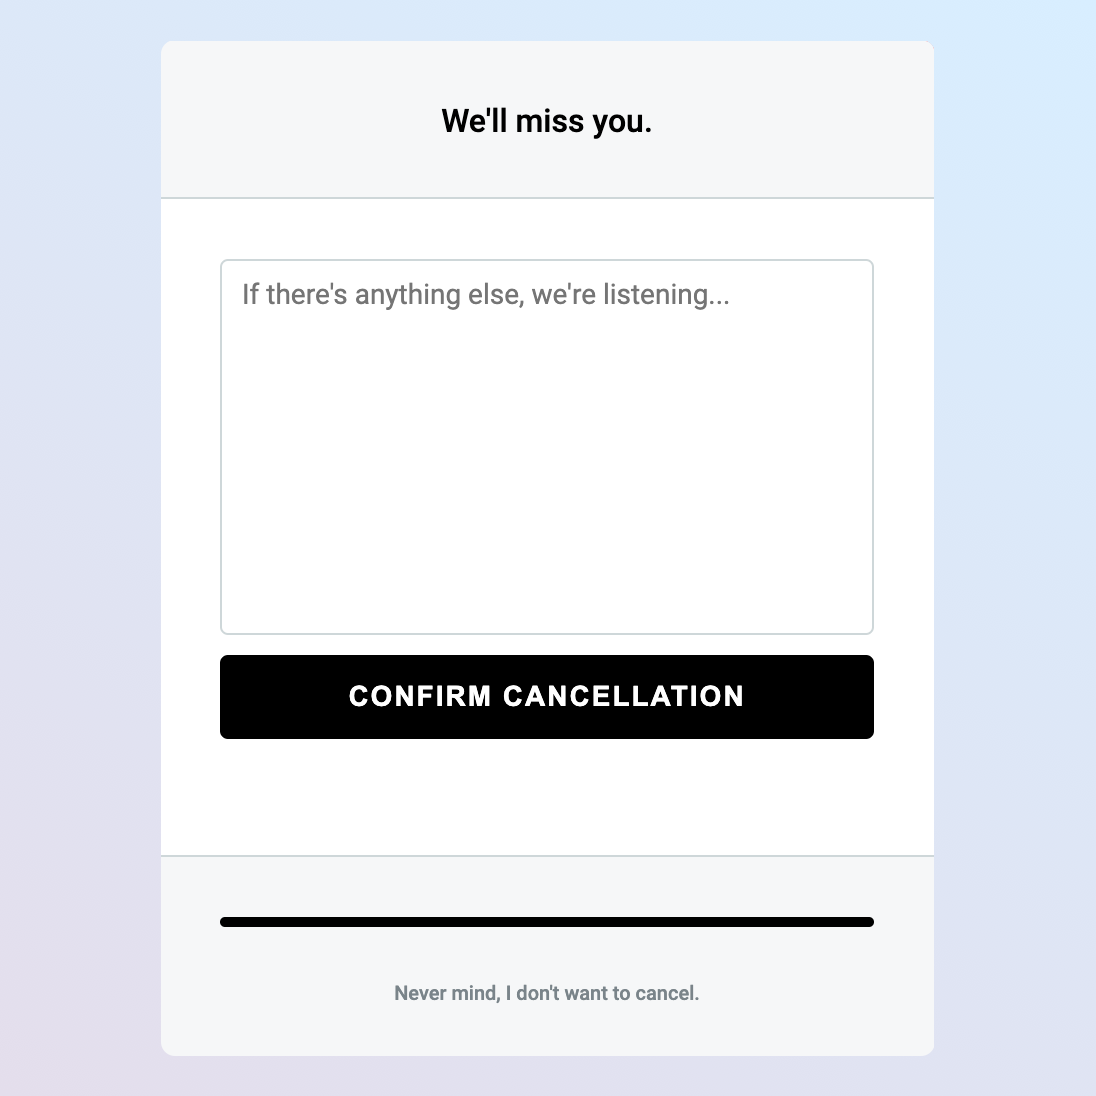 Retain Cancellation Flow modal step 5. It says: We'll miss you. There's a paragraph-size text box to enter feedback, and a button that says confirm cancellation.